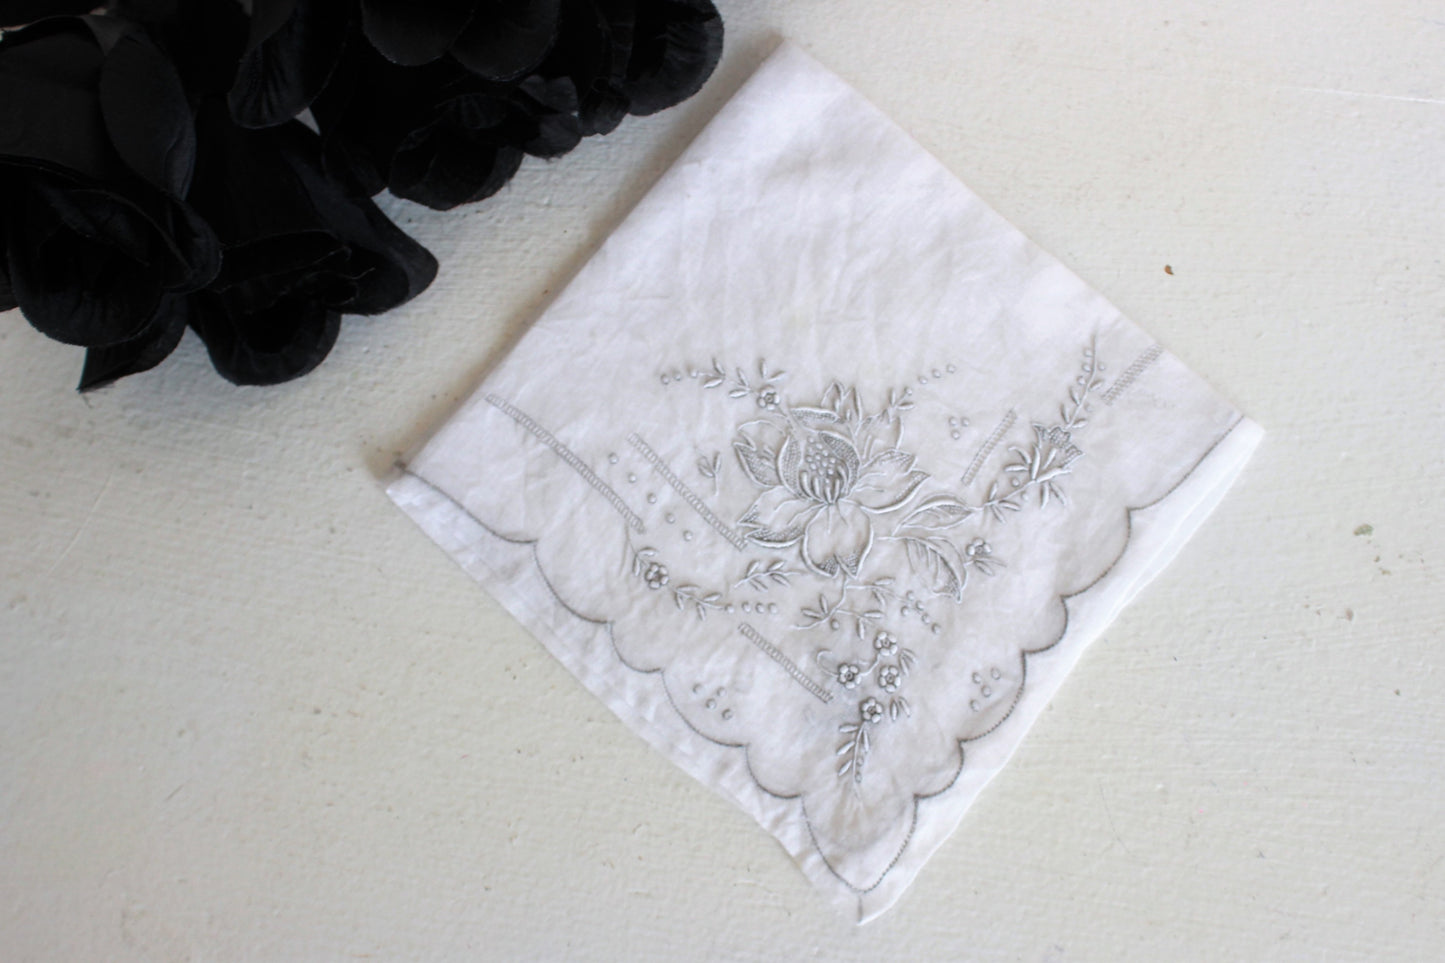 Vintage Handkerchief, Embroidered Gray And White Flowers